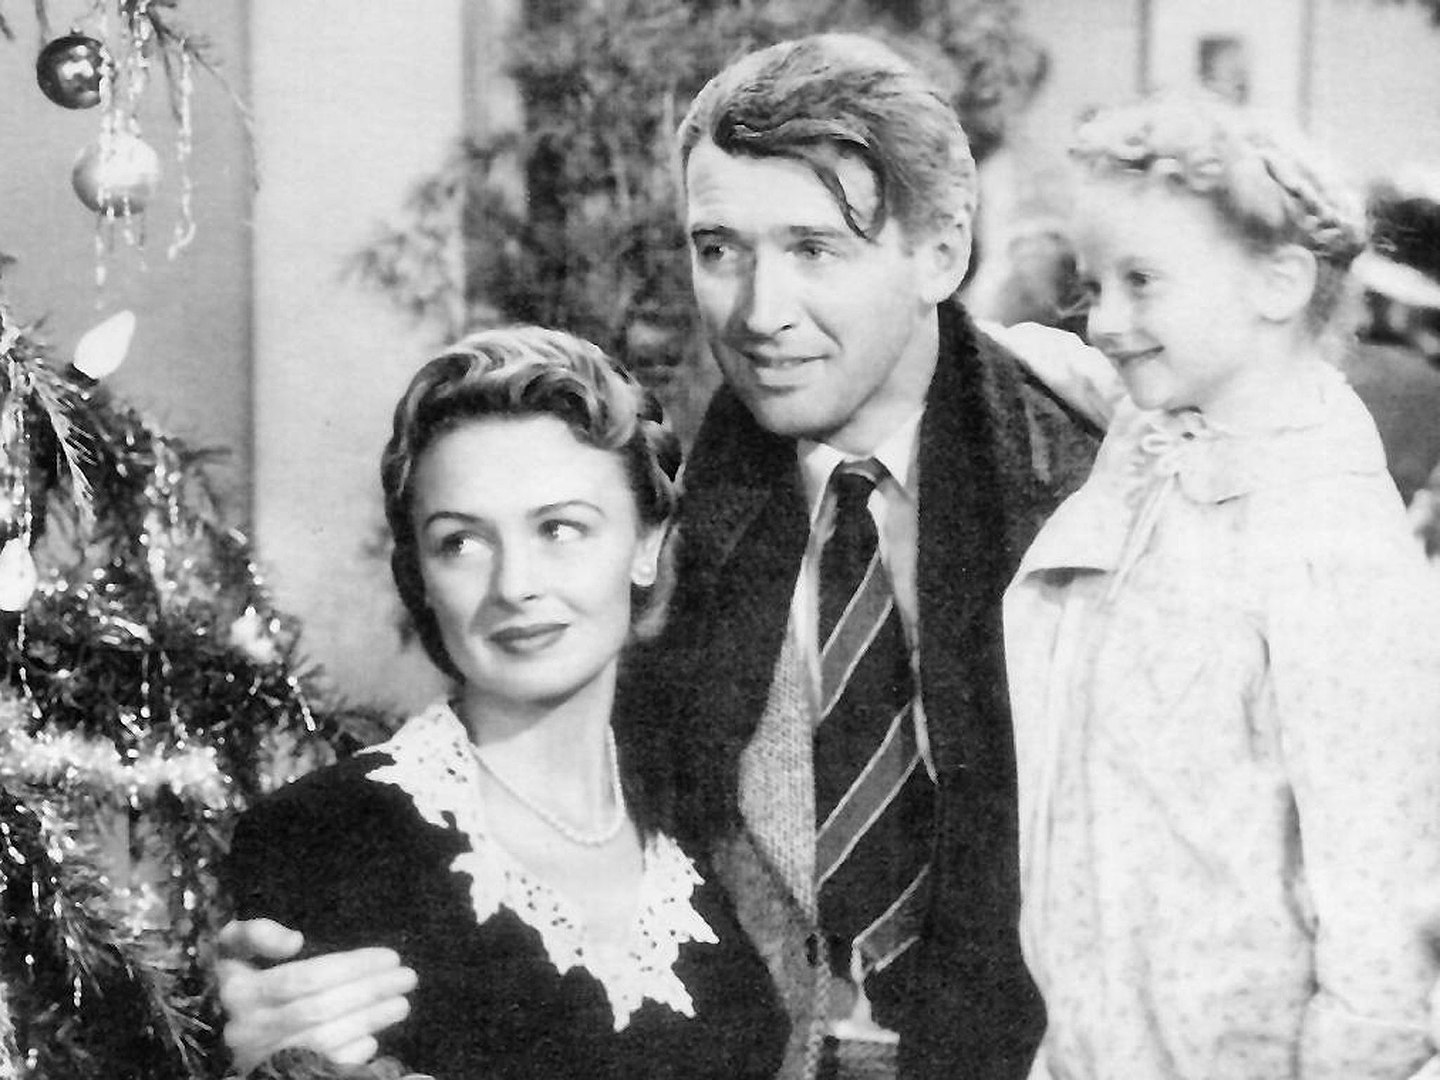 George Bailey hugs his wife, Mary, and holds his daughter, Zuzu, in the movie It's a Wonderful Life